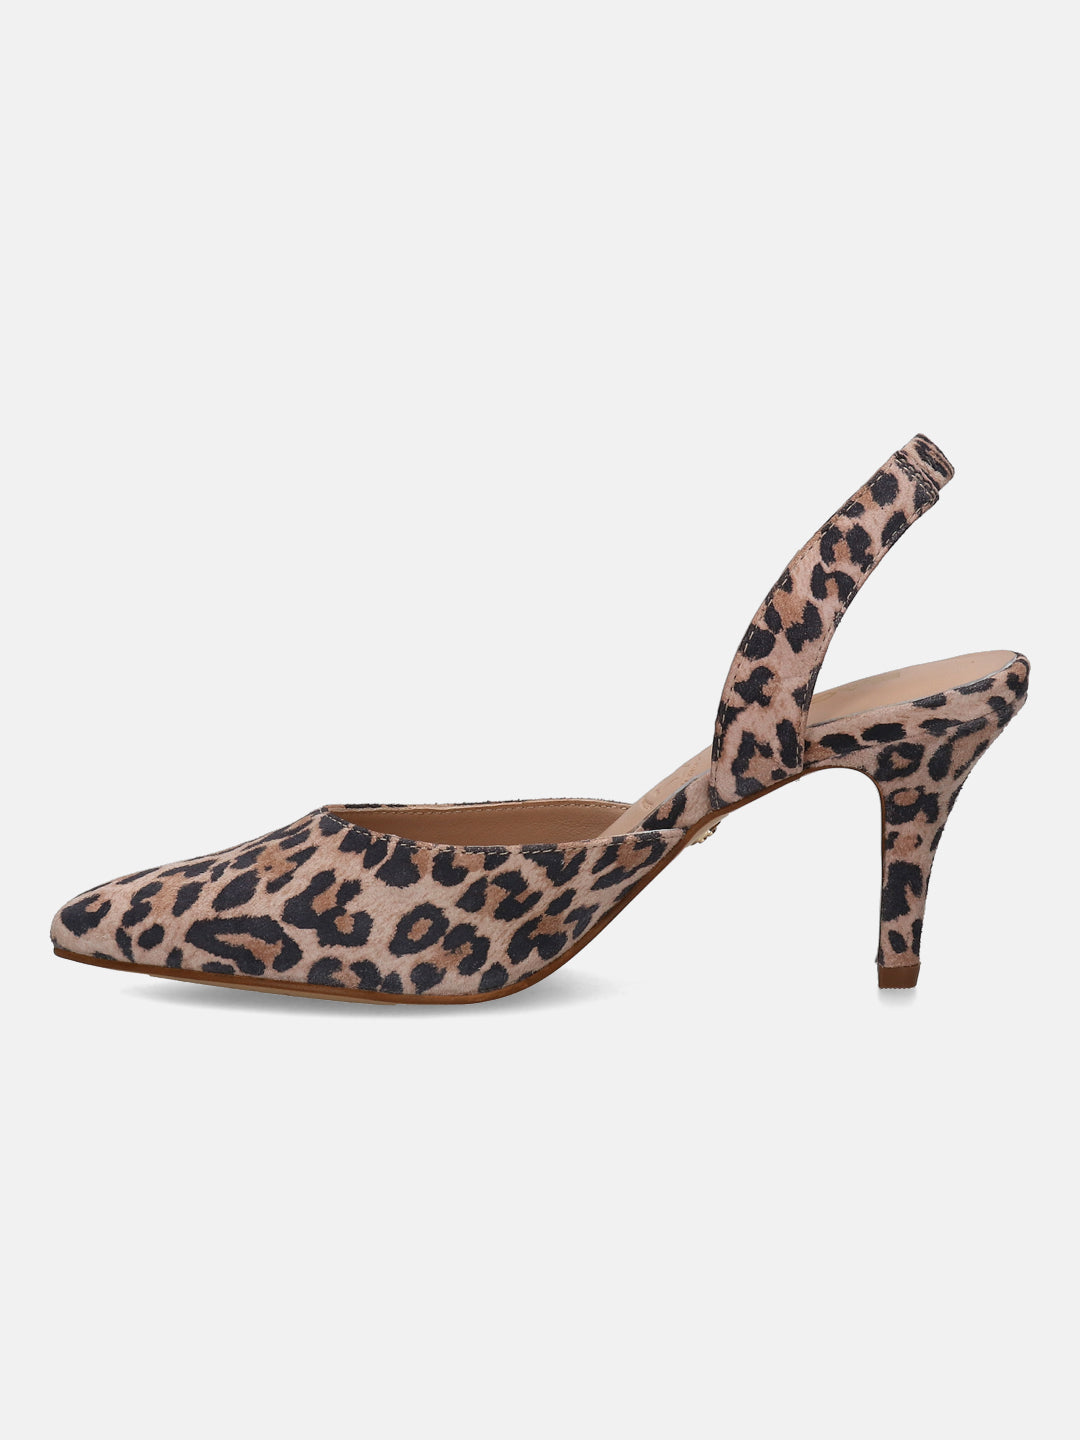 New York Pumps Animal Print – Anabella by Rossy Sanchez